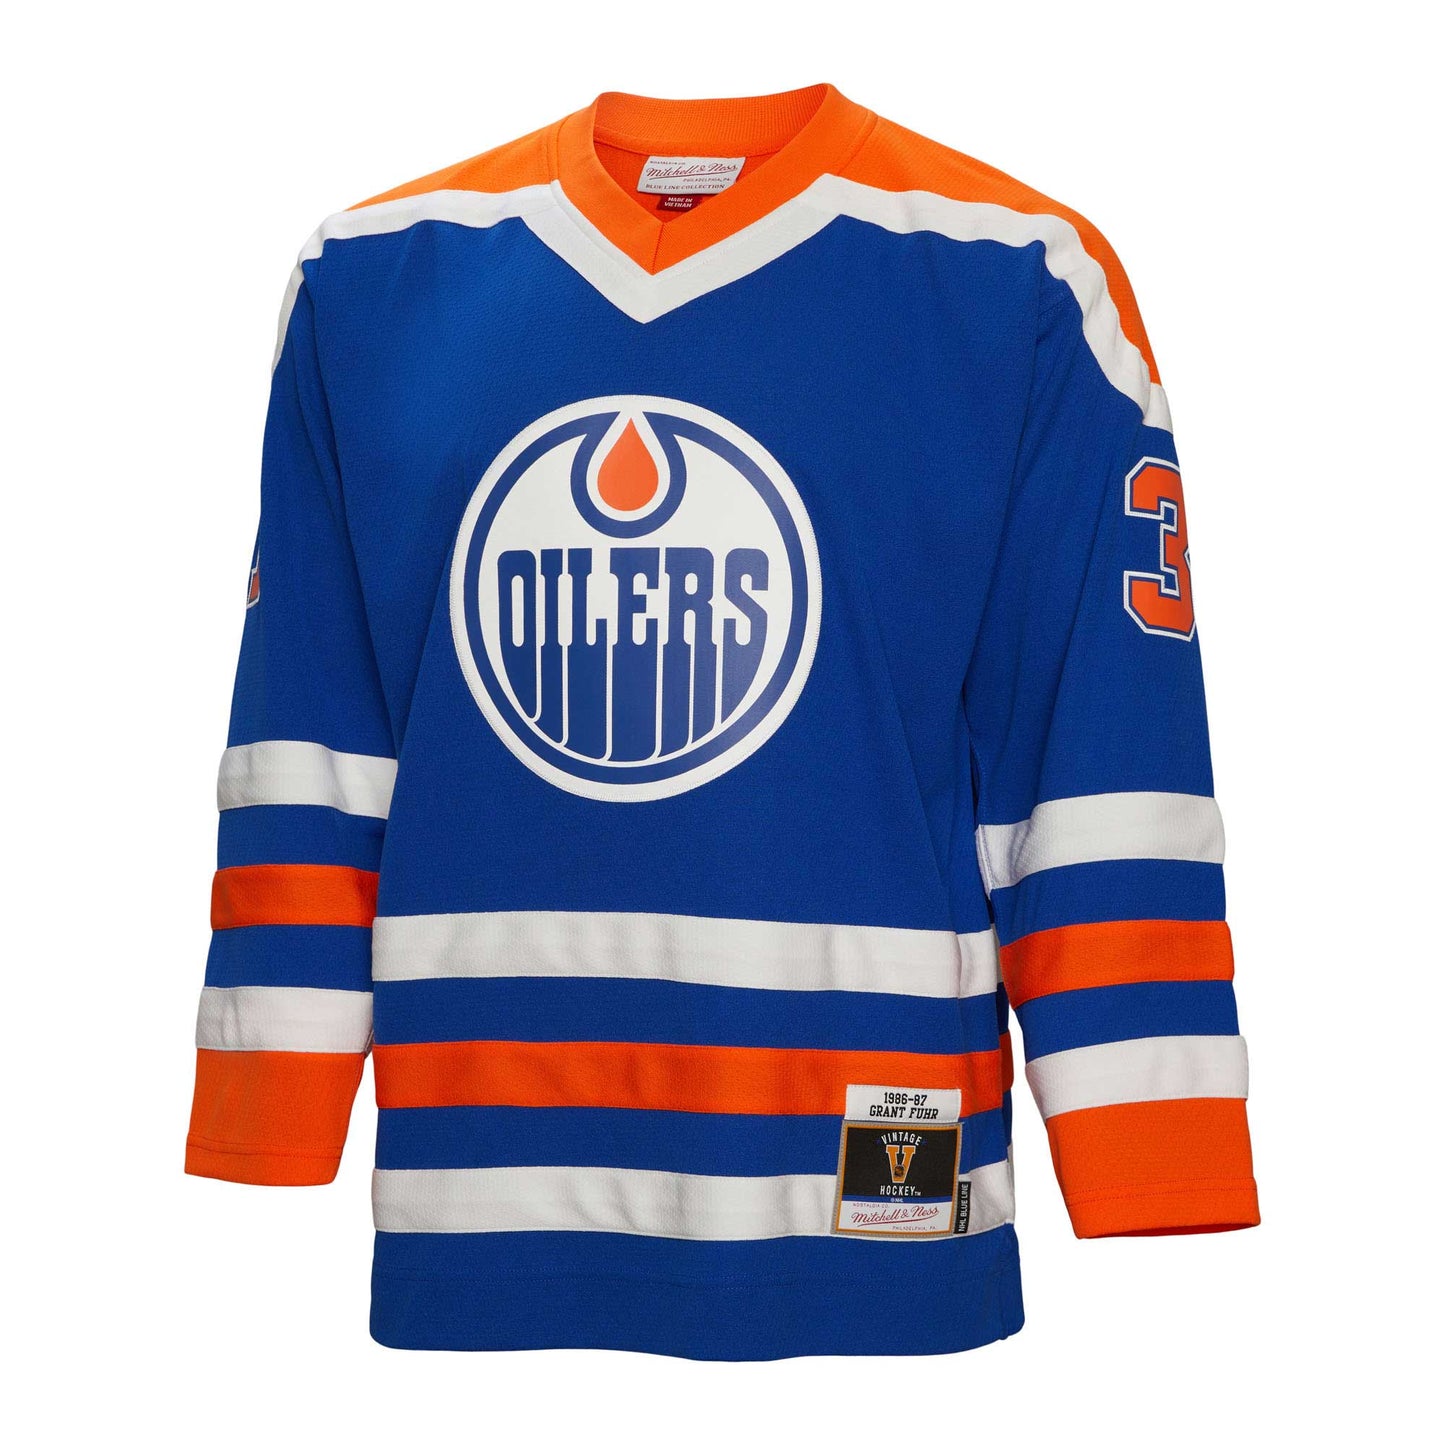 Grant Fuhr Edmonton Oilers Mitchell & Ness 1986/87  Blue Line Player Jersey - Royal